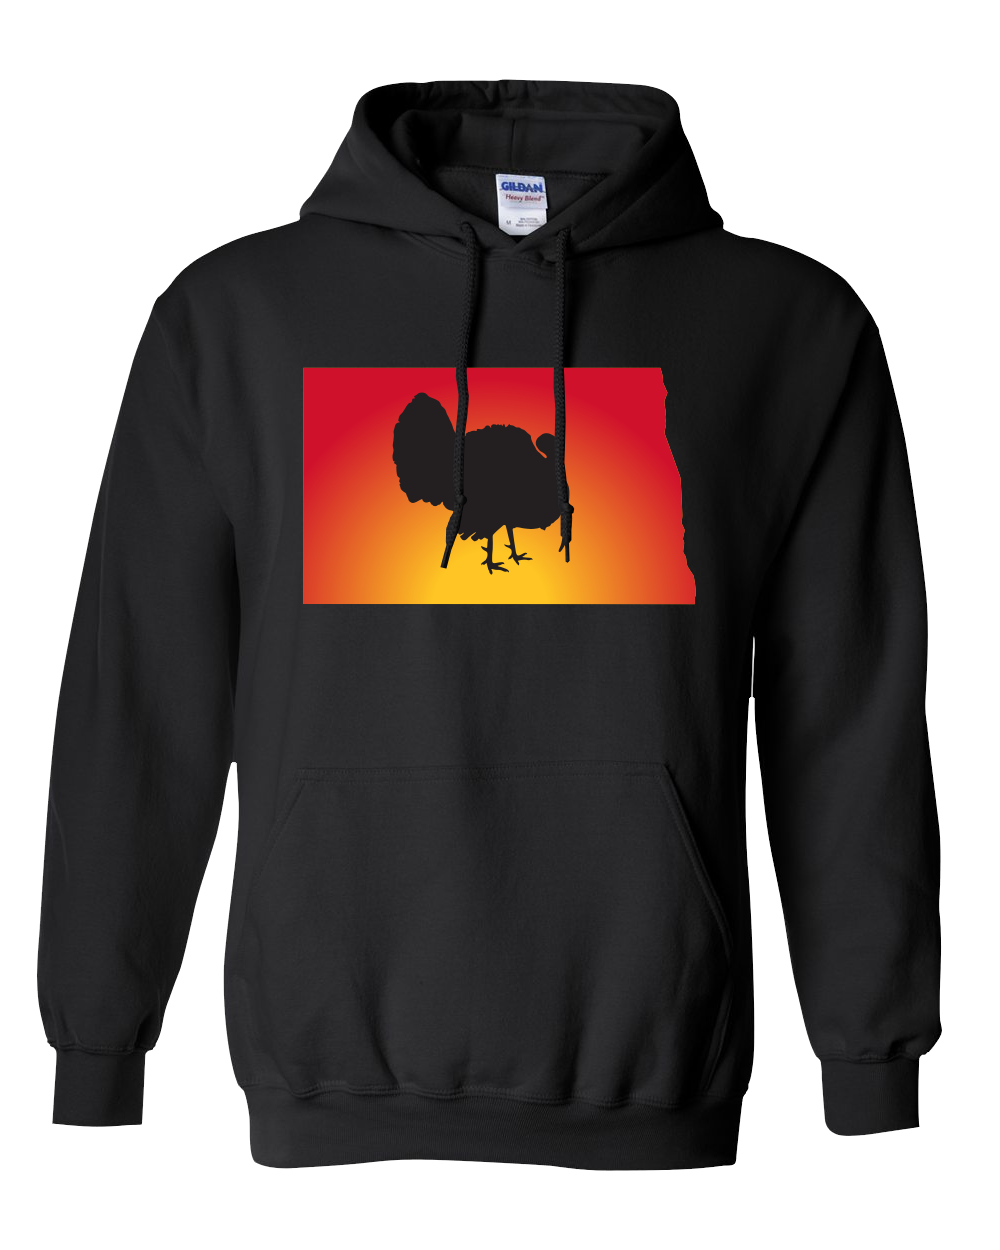 Pullover Hooded Sweatshirt North Dakota Black Turkey Vibrant Design High Quality Tight Knit Ring Spun Low Maintenance Cotton Printed With The Newest Available Color Transfer Technology